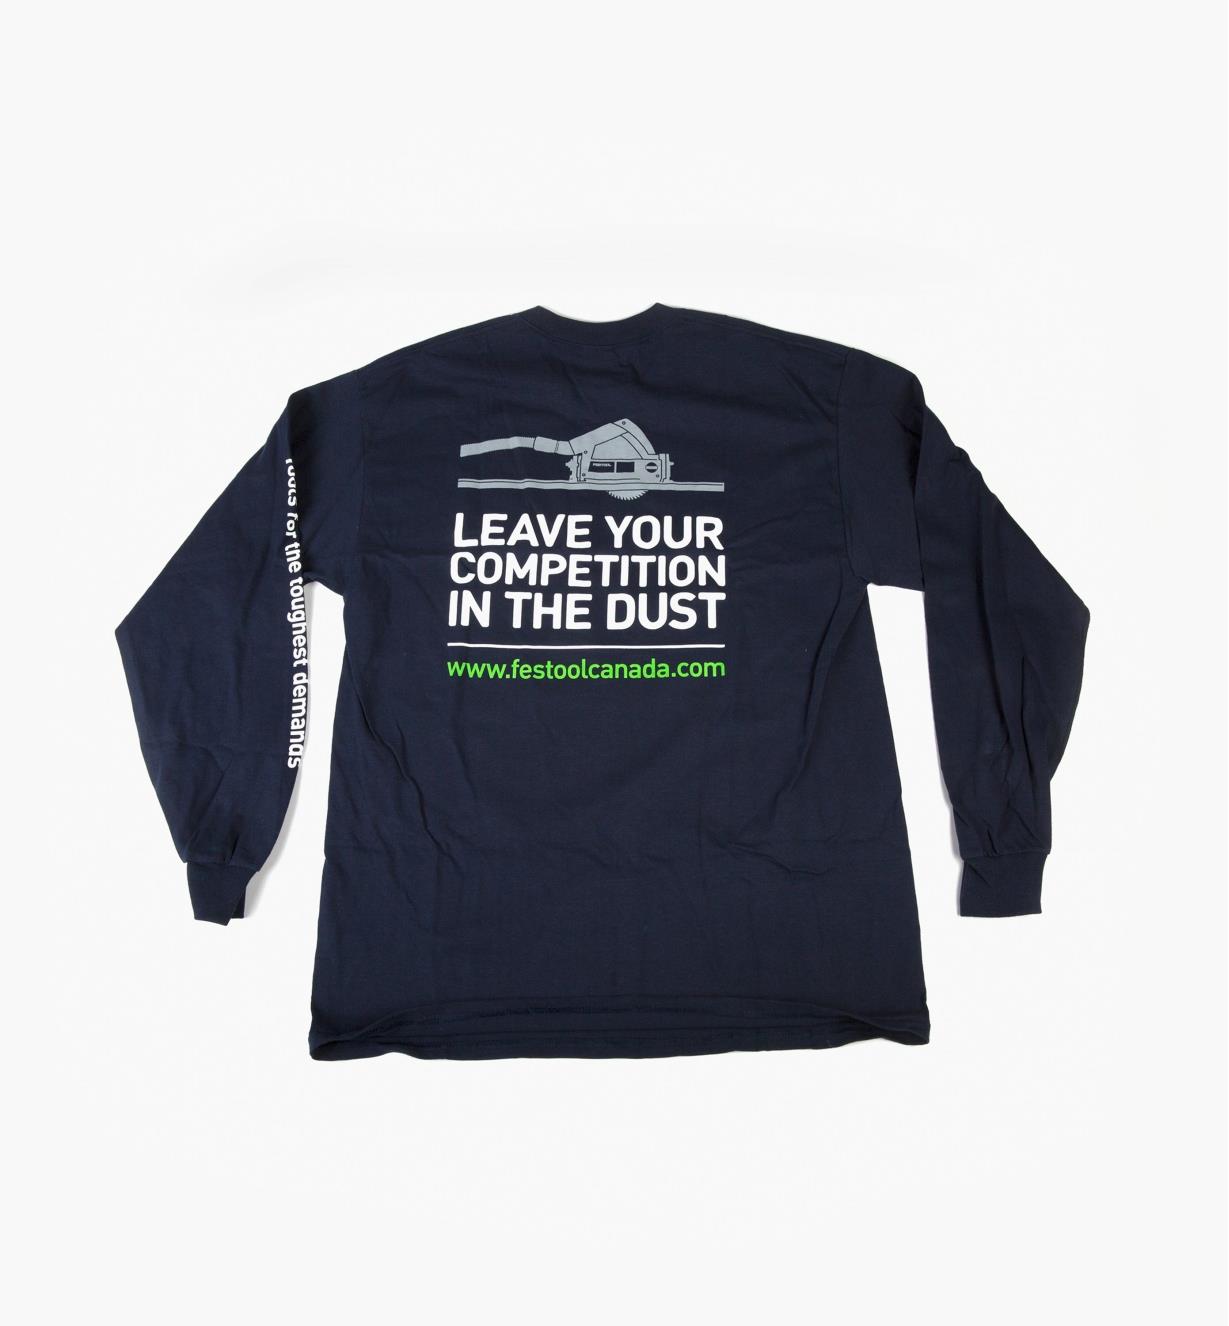 Back of shirt with image of circular saw and "Leave your competition in the dust" printed in large letters